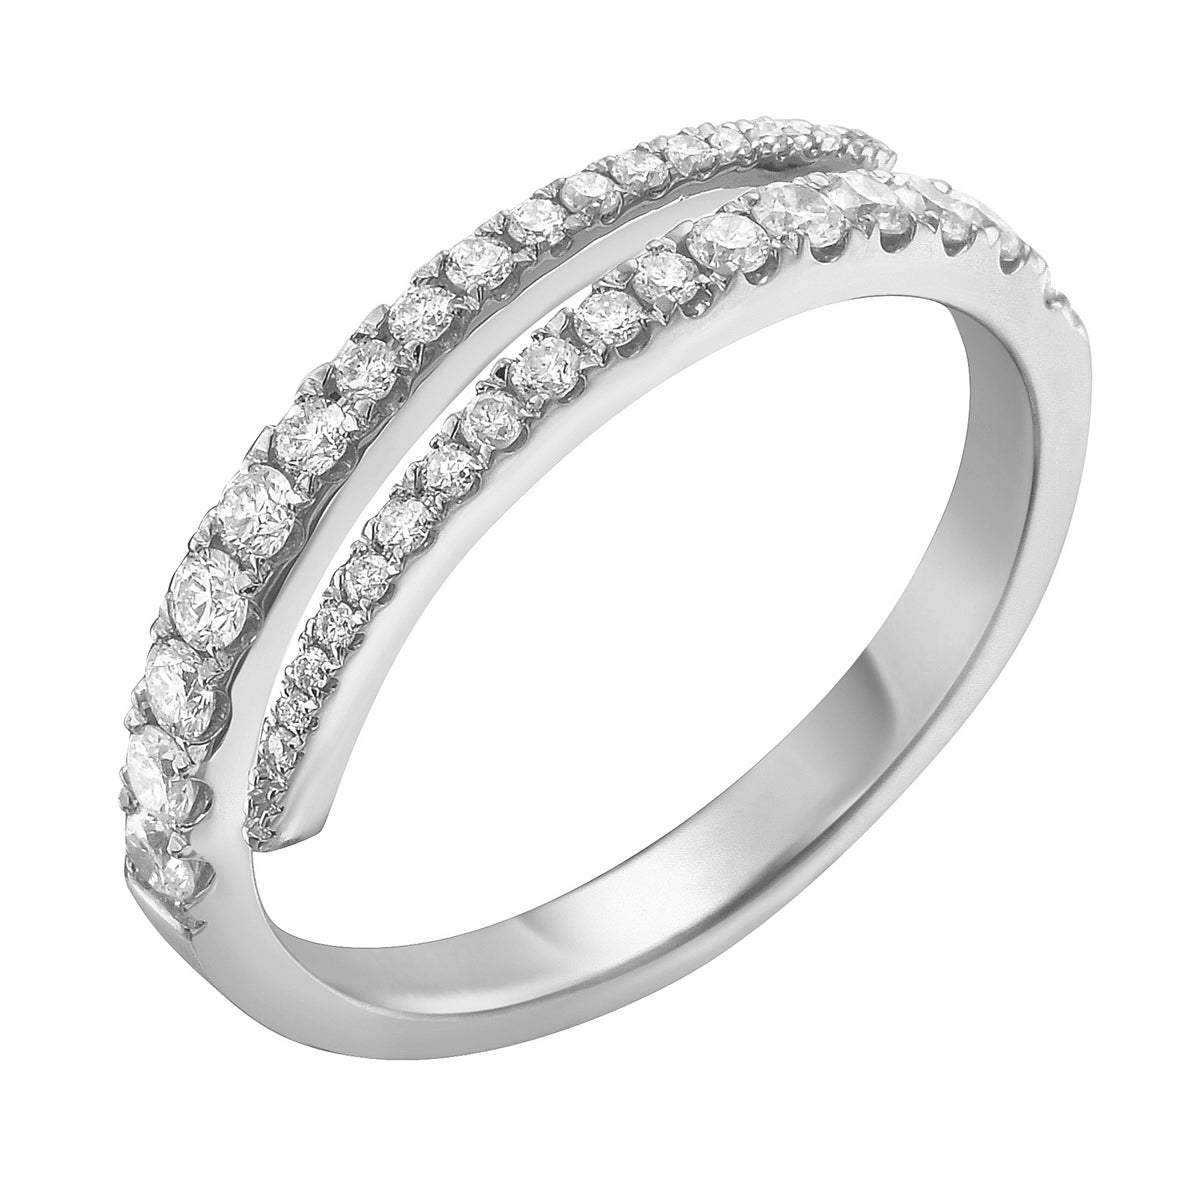 Ring 14KW/2.7G 34RD-0.42CT